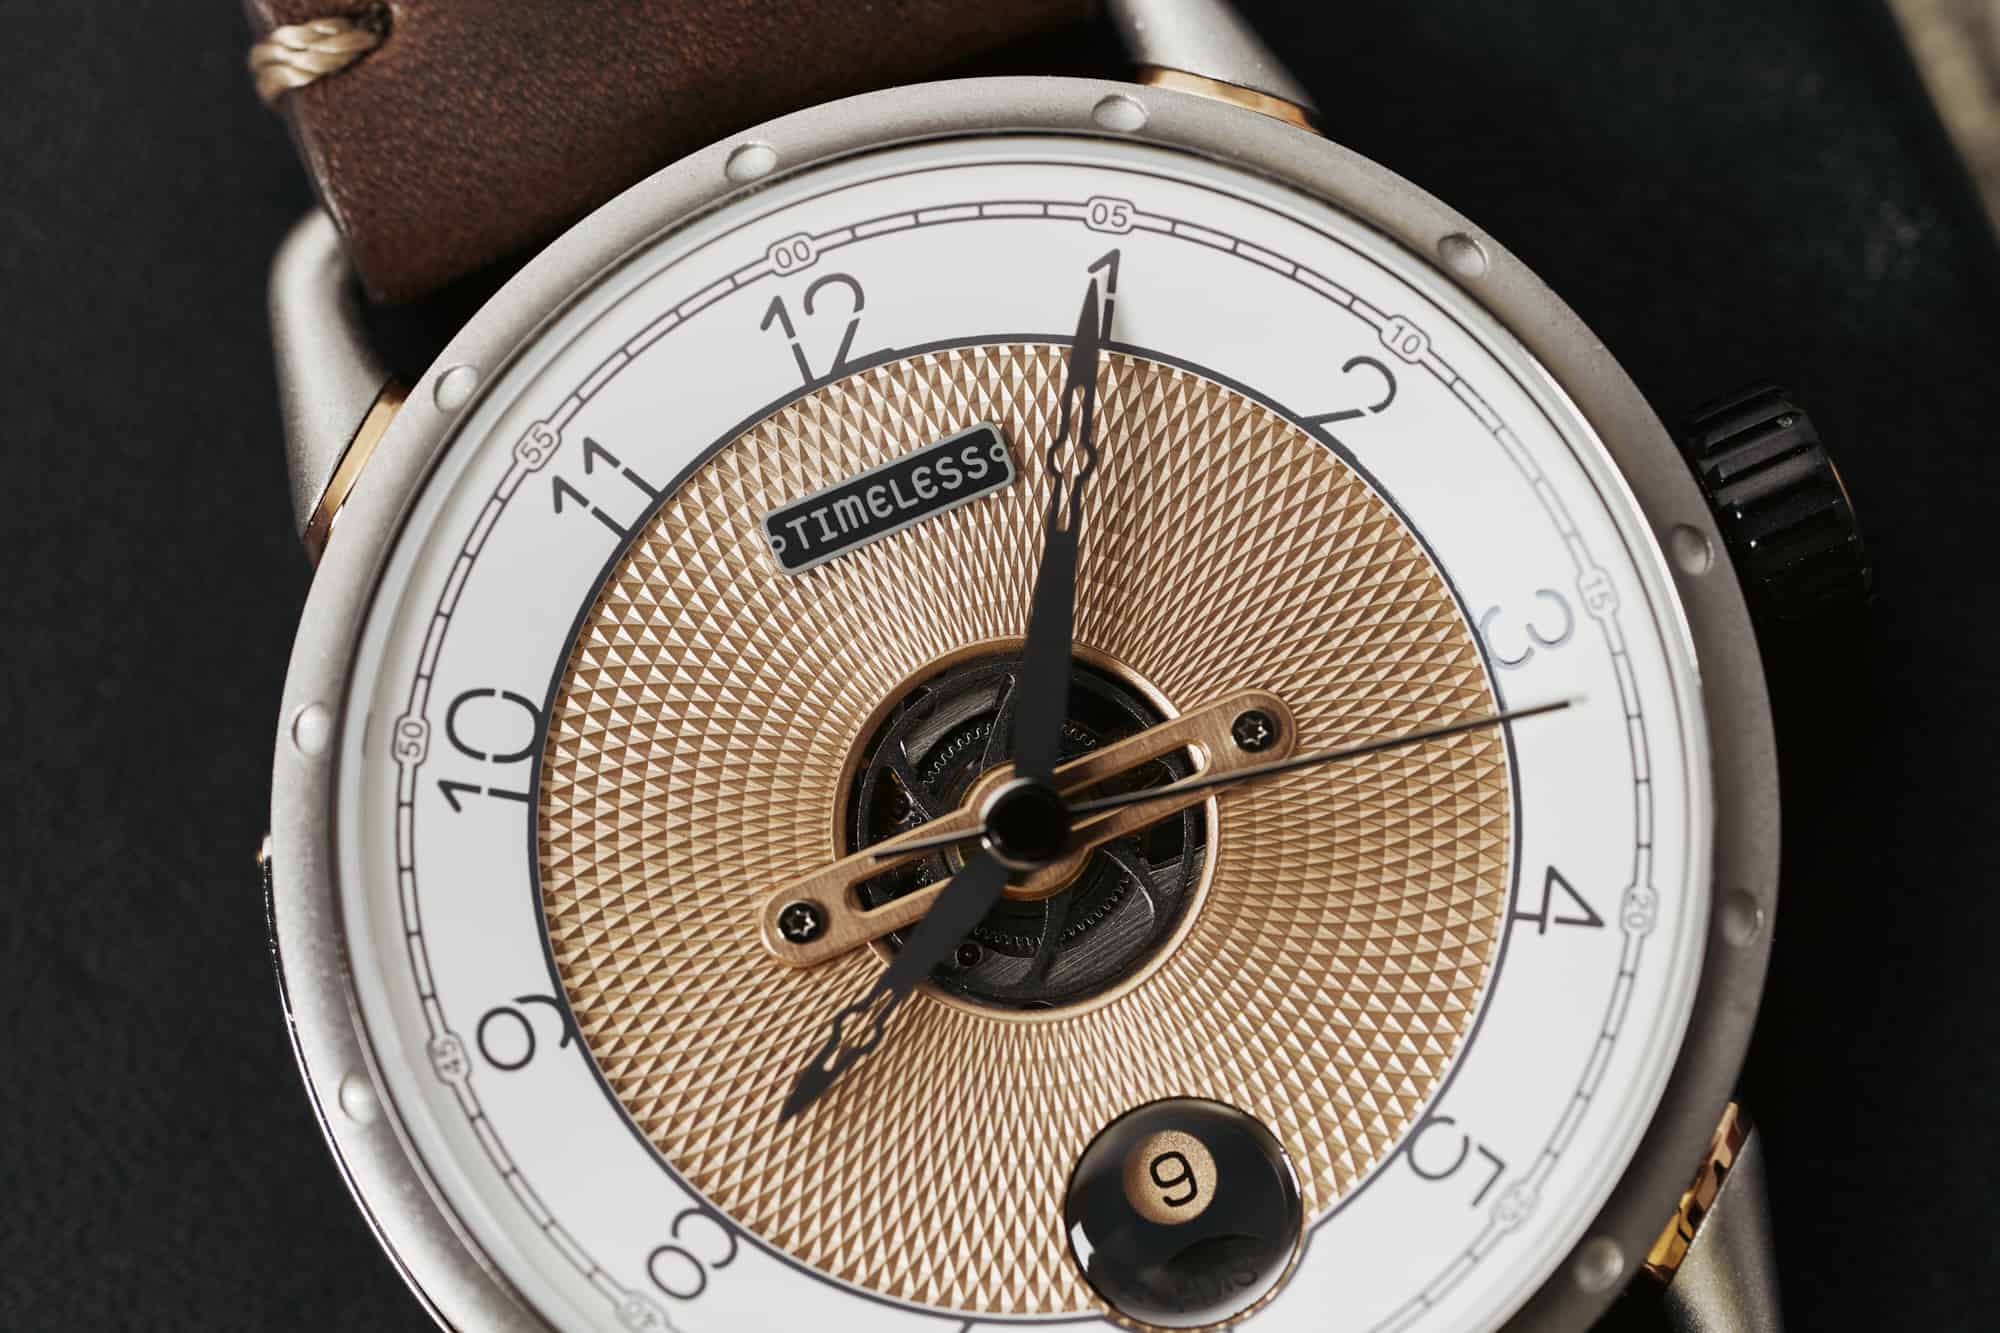 Hands-On: The Peculiar Timeless HMS